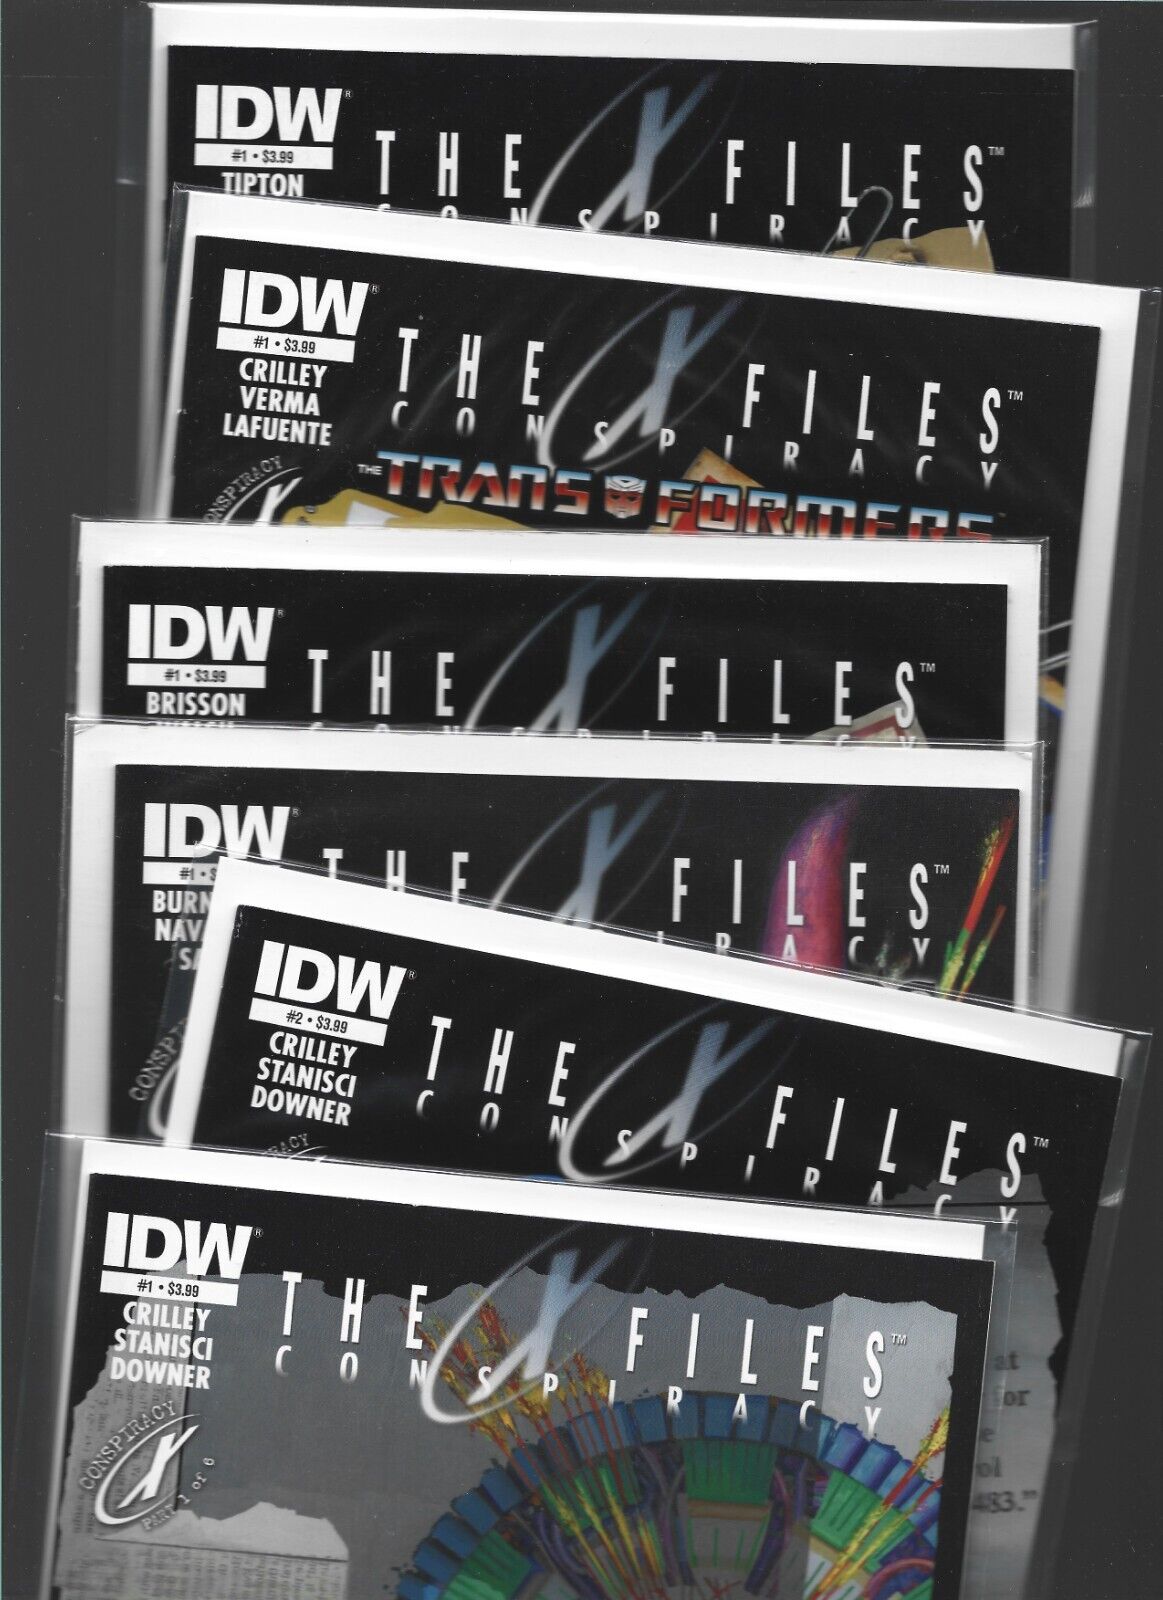 The X-Files Conspiracy #1-2 + Transformers 1 Crow 1 Turtles 1 Ghostbusters 1